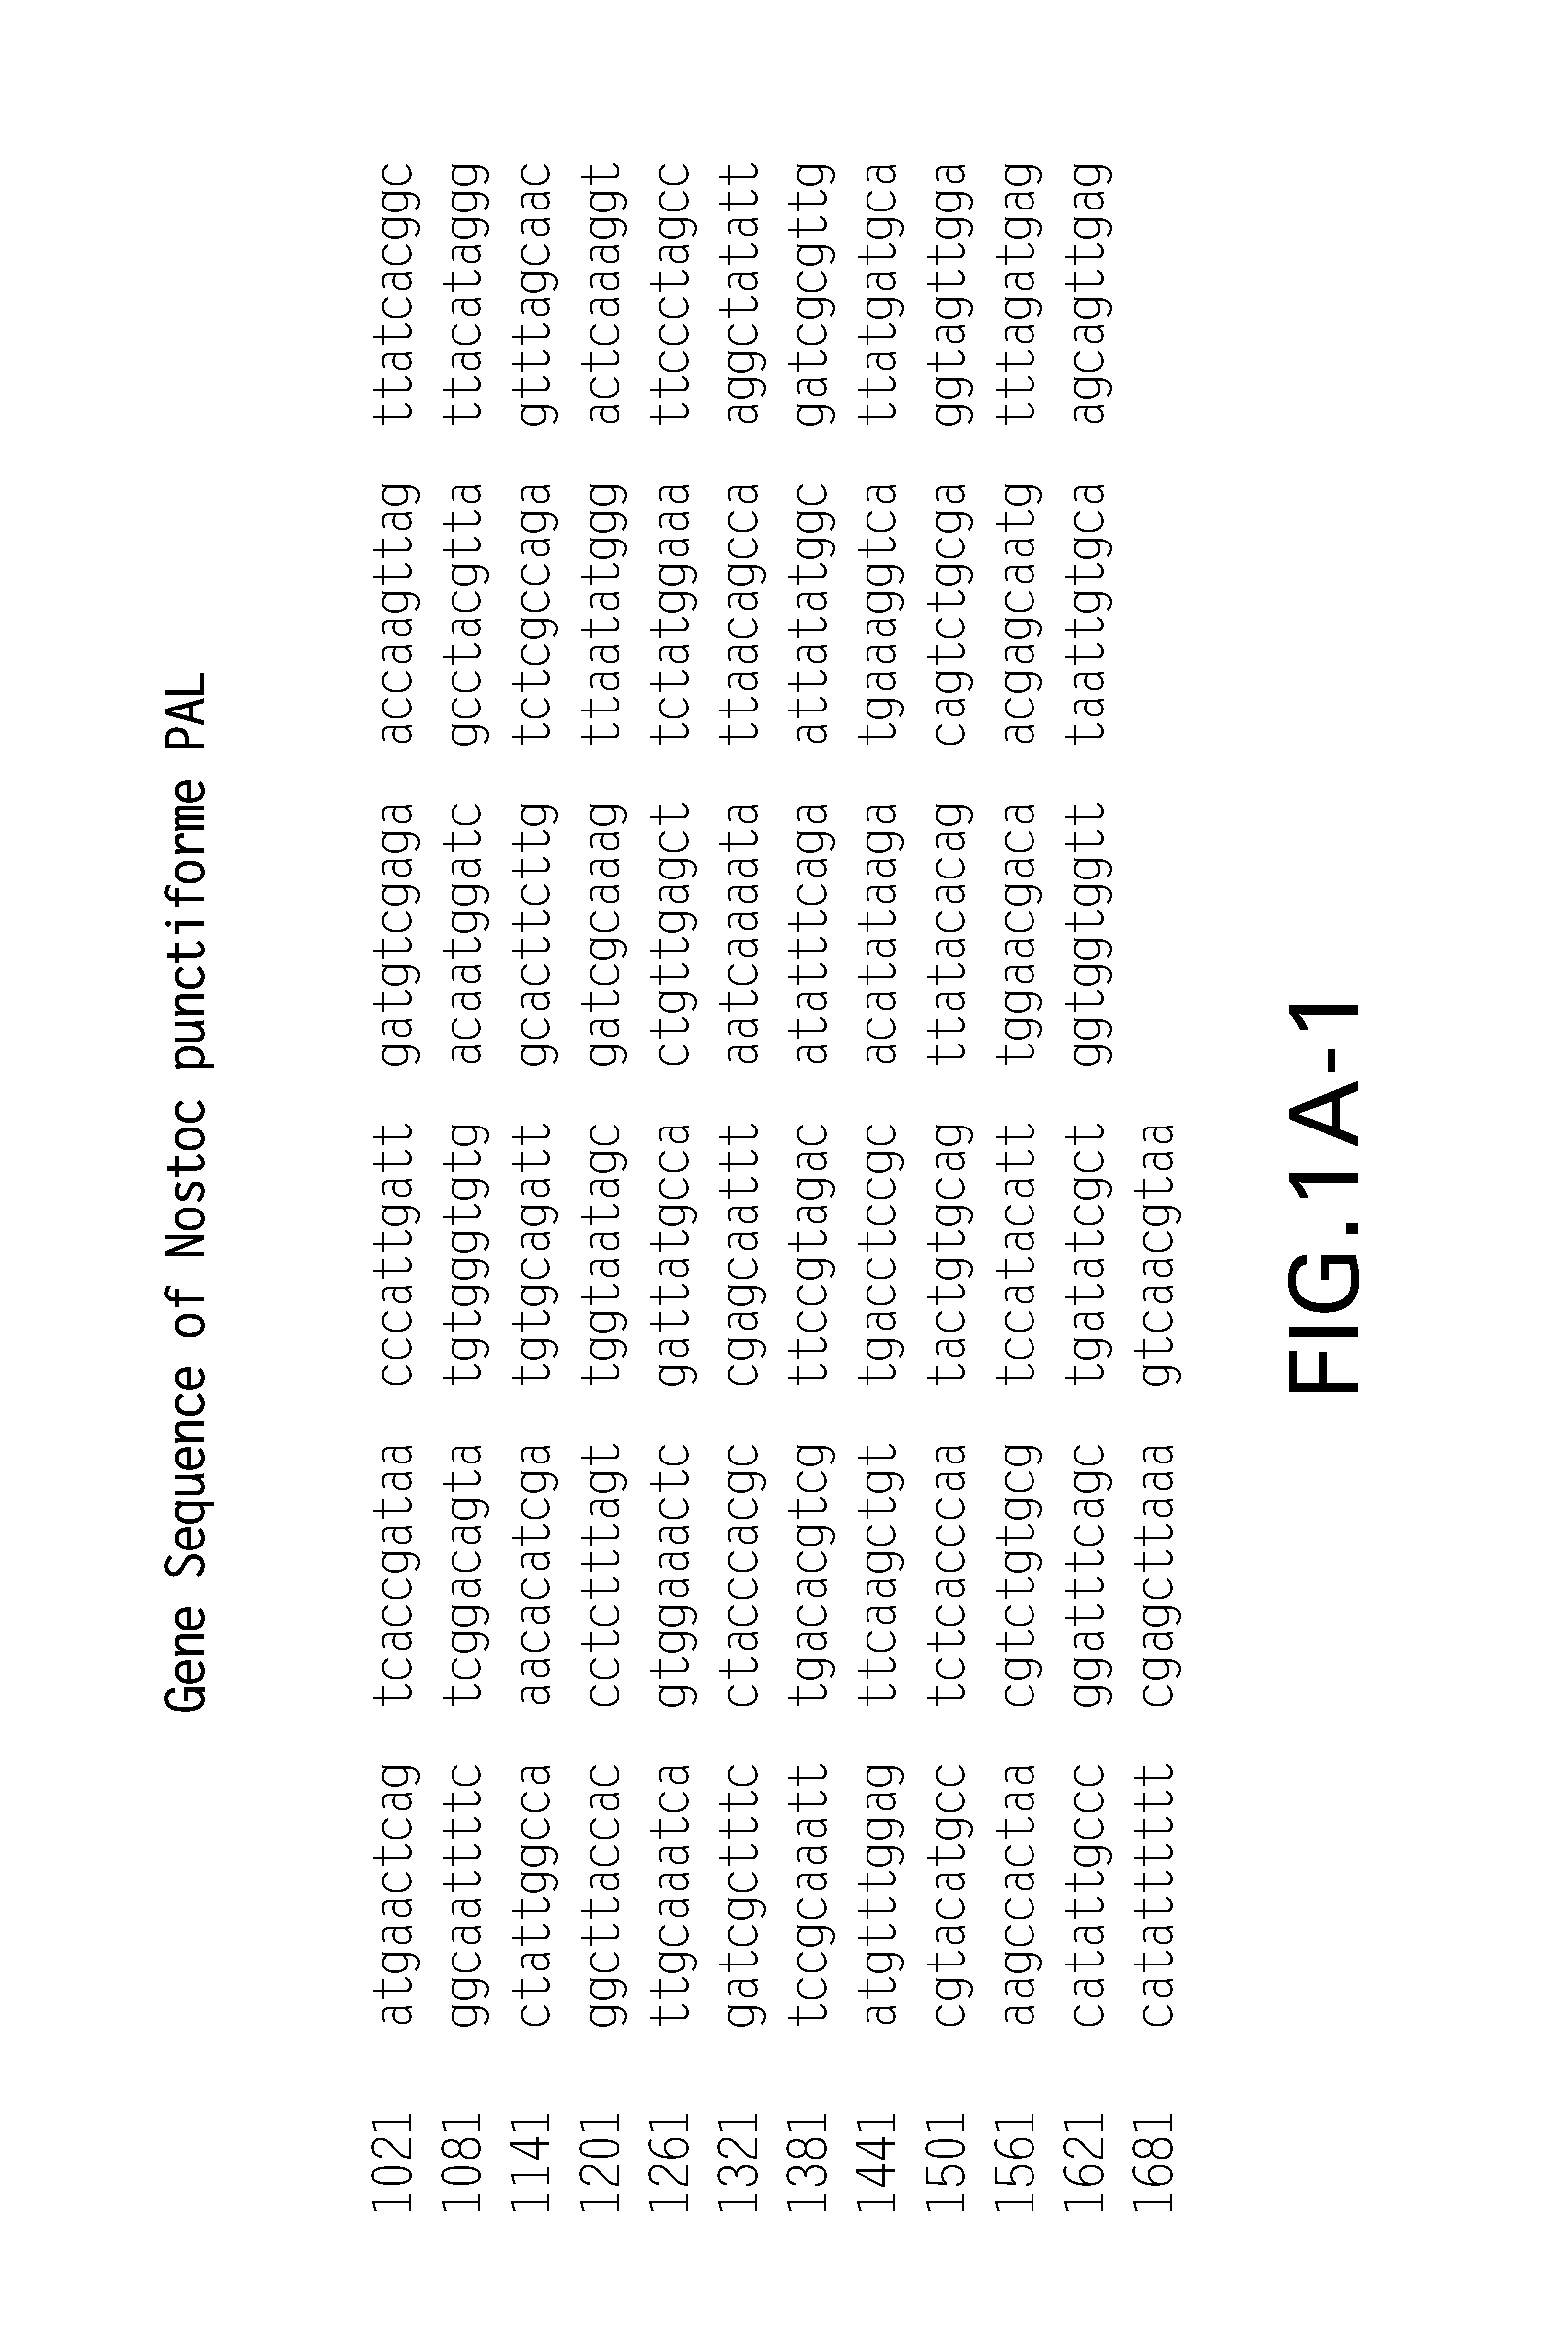 Compositions of prokaryotic phenylalanine ammonia-lyase variants and methods of using compositions thereof